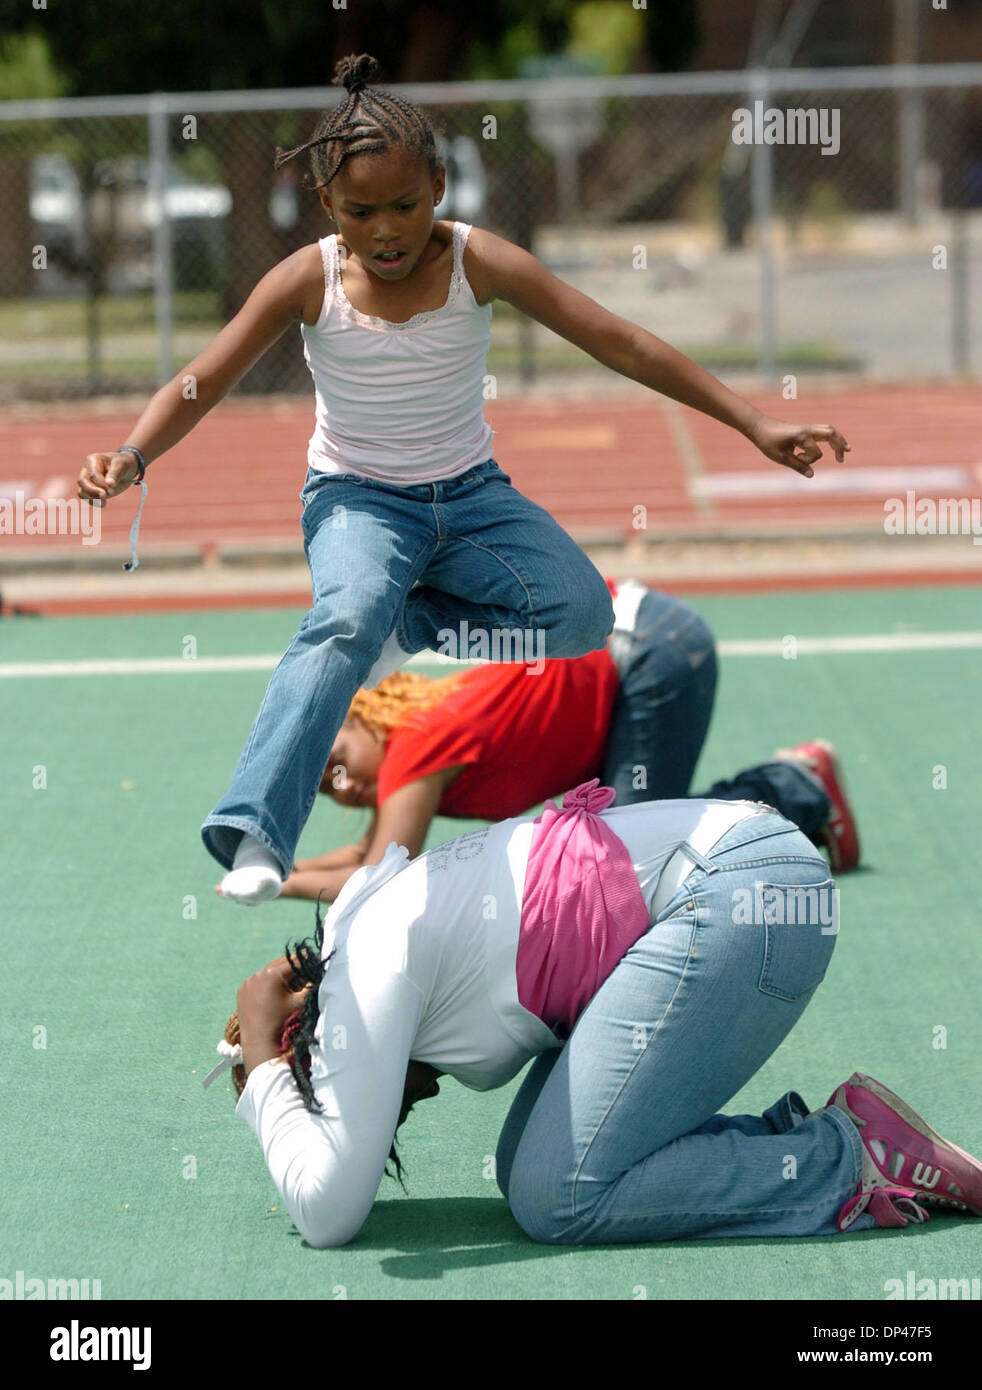 Jul 29, 2006; San Pablo, CA, USA; AMANDA POLK, 8, jumps over RAYSHELL DAVIS at the the BSAA (Black Sports Agents Association) sports and dance clinic at Contra Costa College. The clinic, thrown by Andre Farr, a former Kennedy High School and UCLA football player, featured motivational speakers and professional coaches giving instruction in basketball, football and dance among other Stock Photo